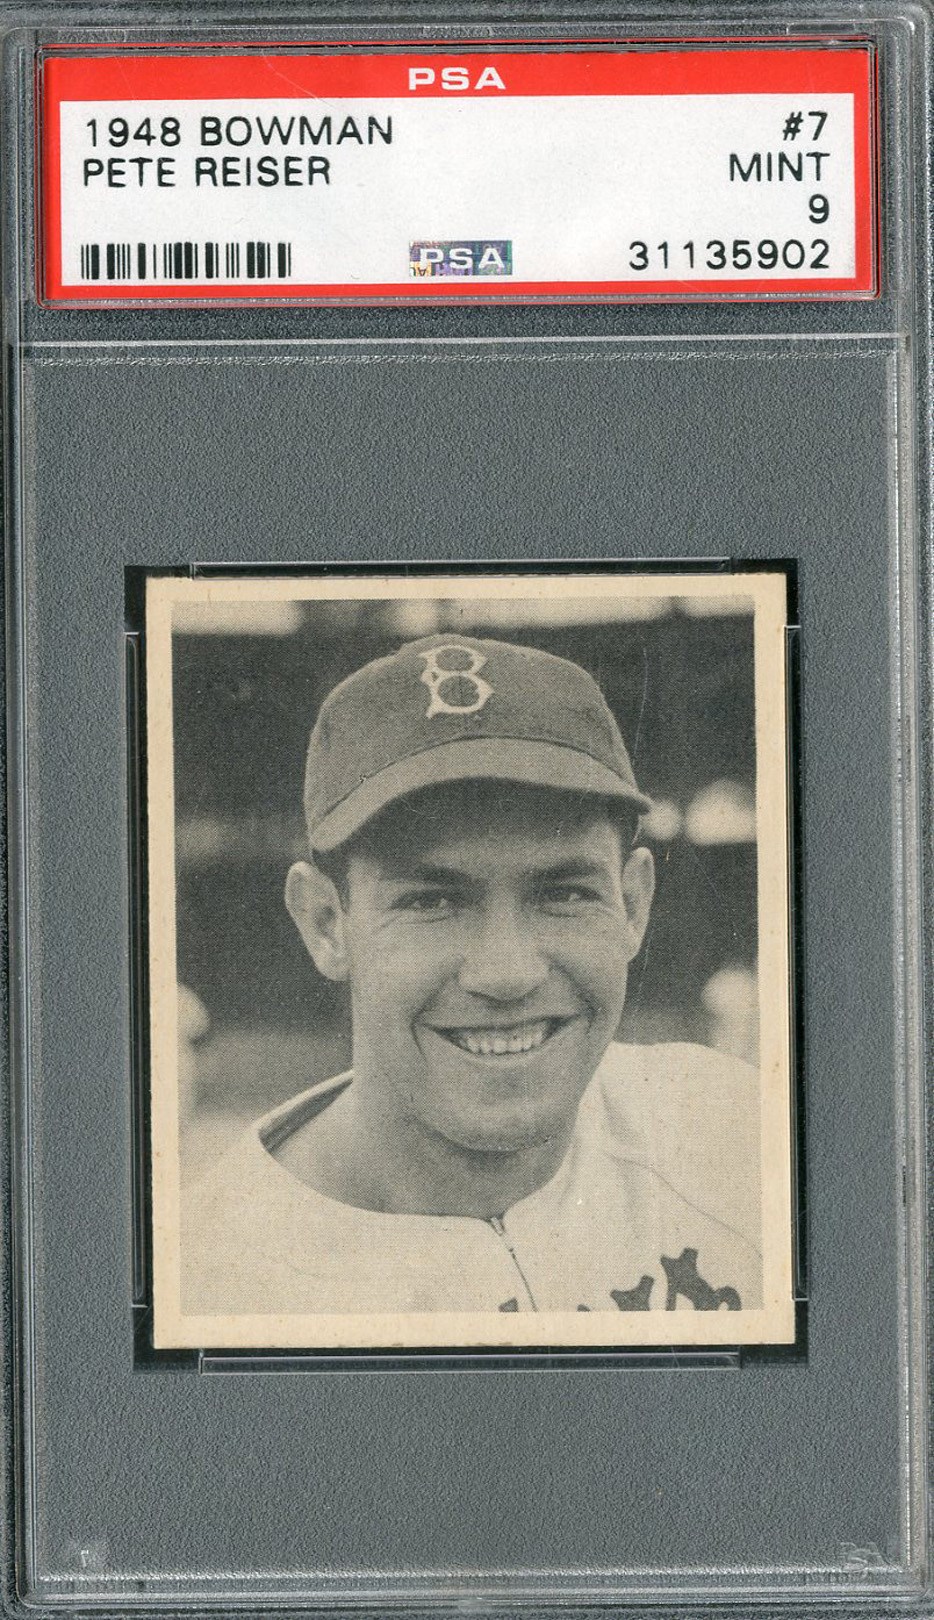 Baseball and Trading Cards - 1948 Bowman #7 Pete Reiser Rookie - PSA MINT 9